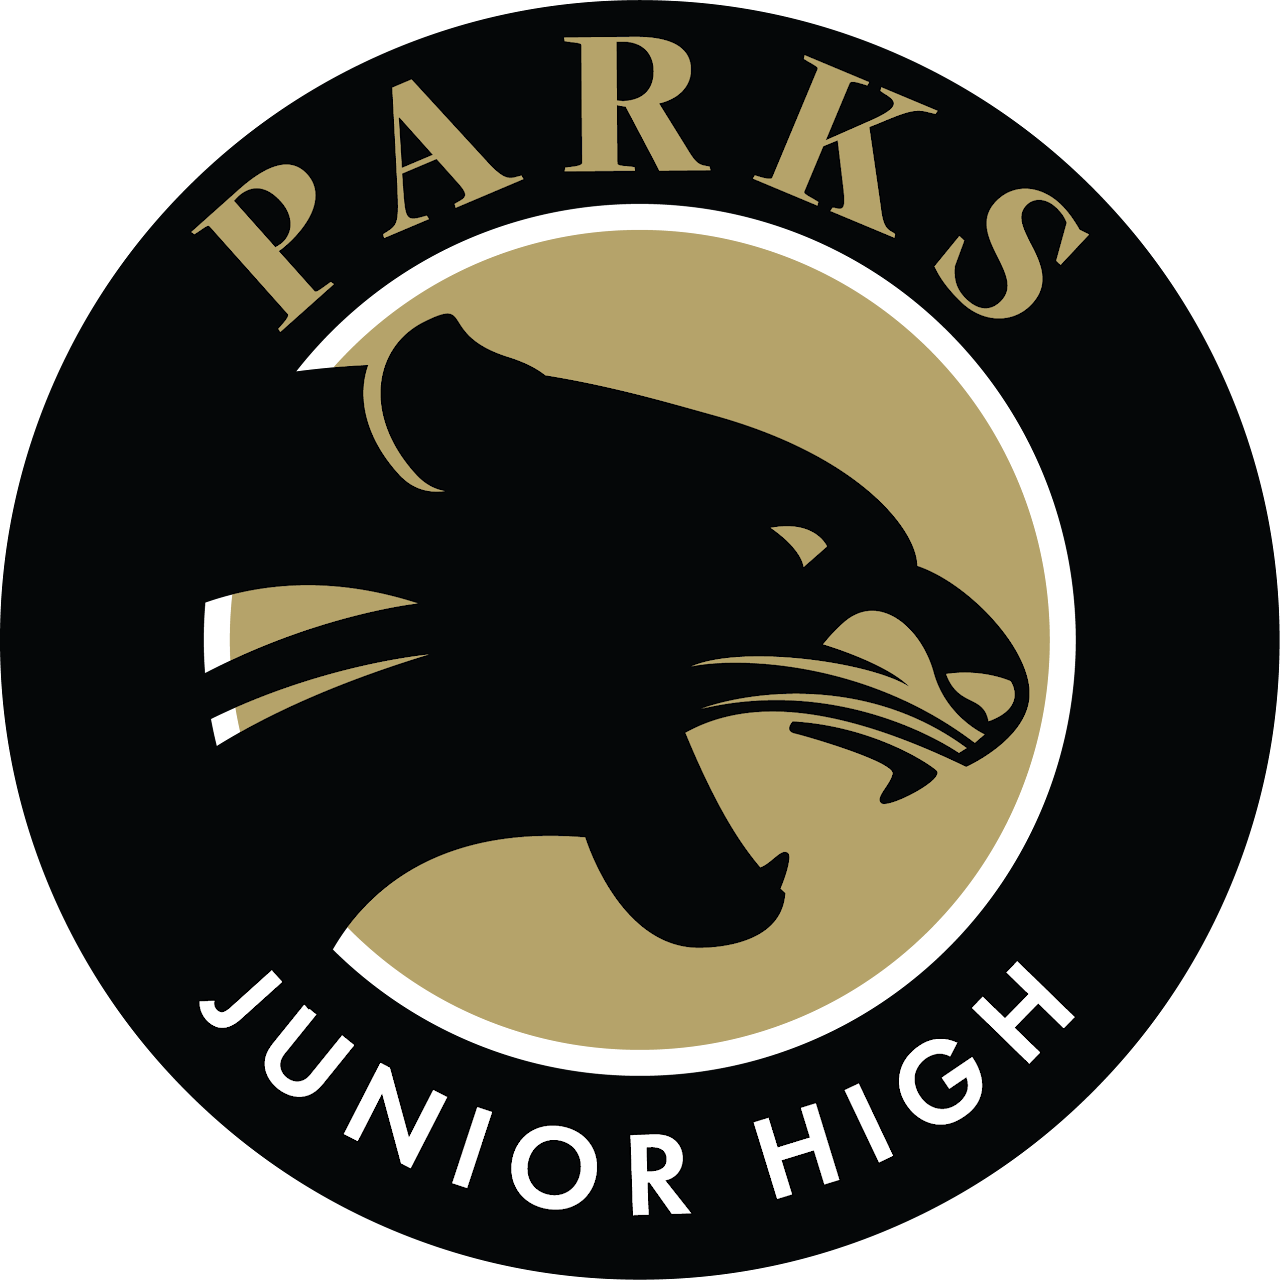 Parks Logo with the panther